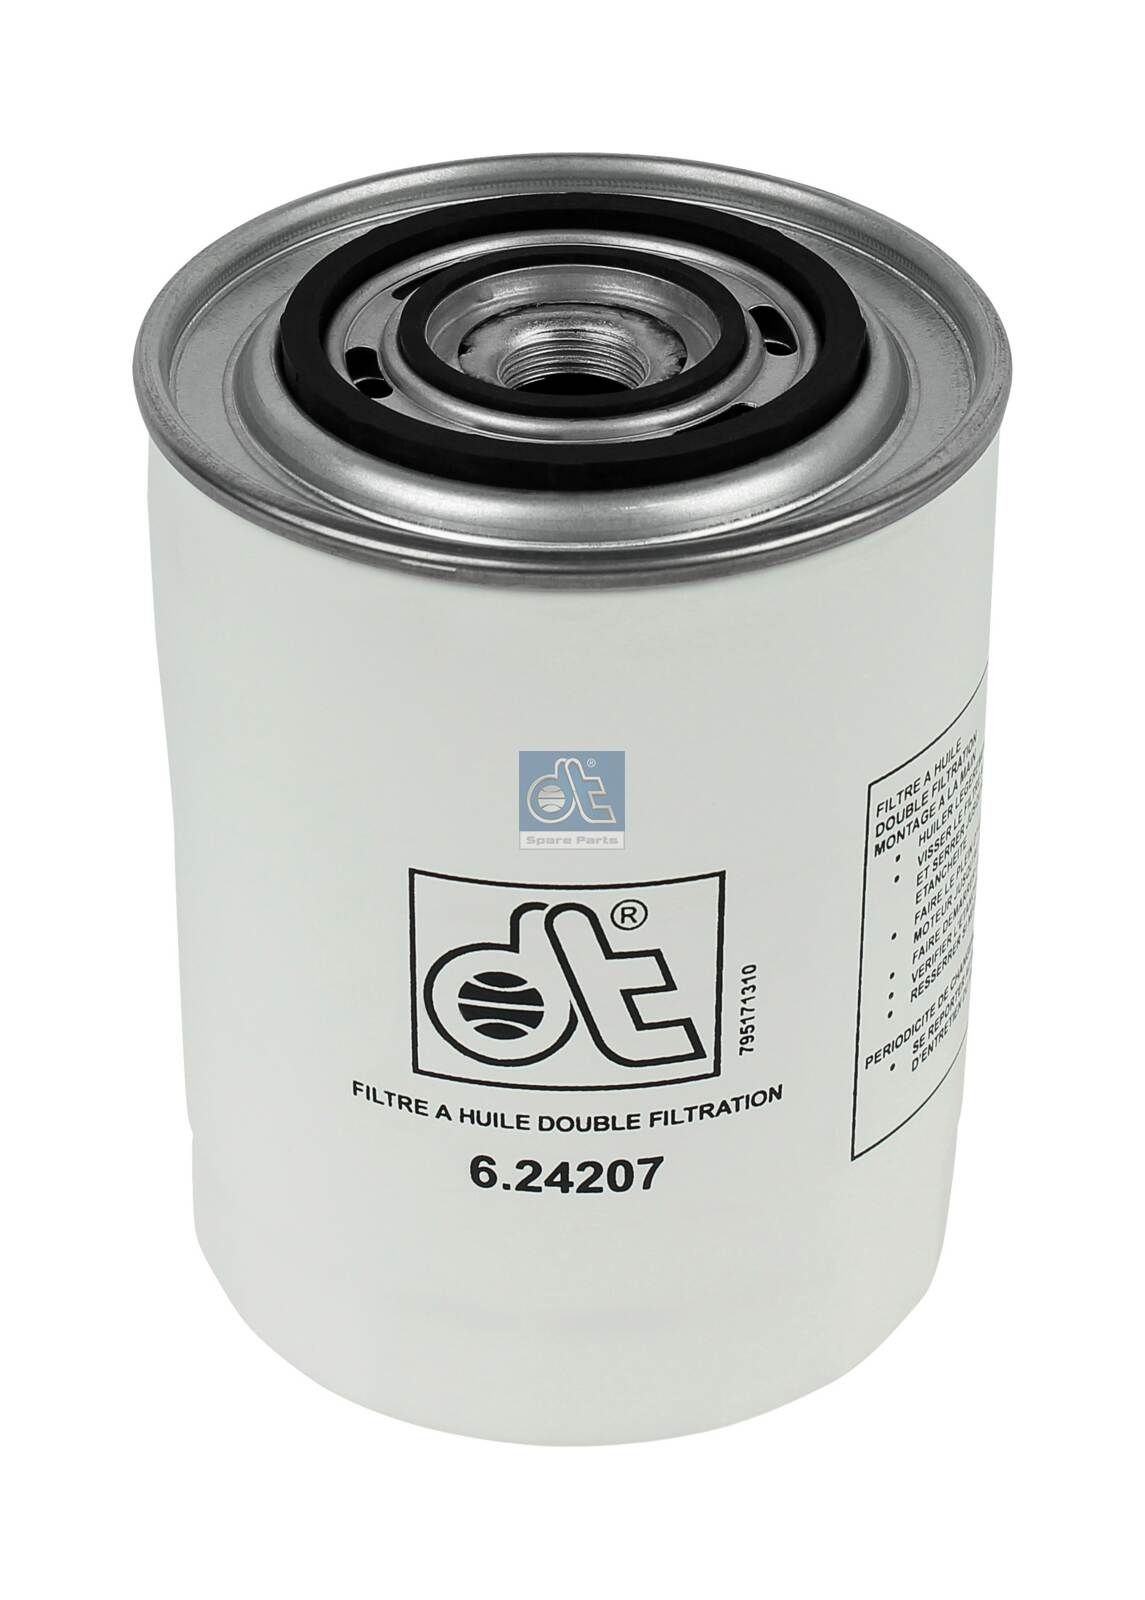 WP 1144 DT Spare Parts 6.24207 Oil filter 190 3784